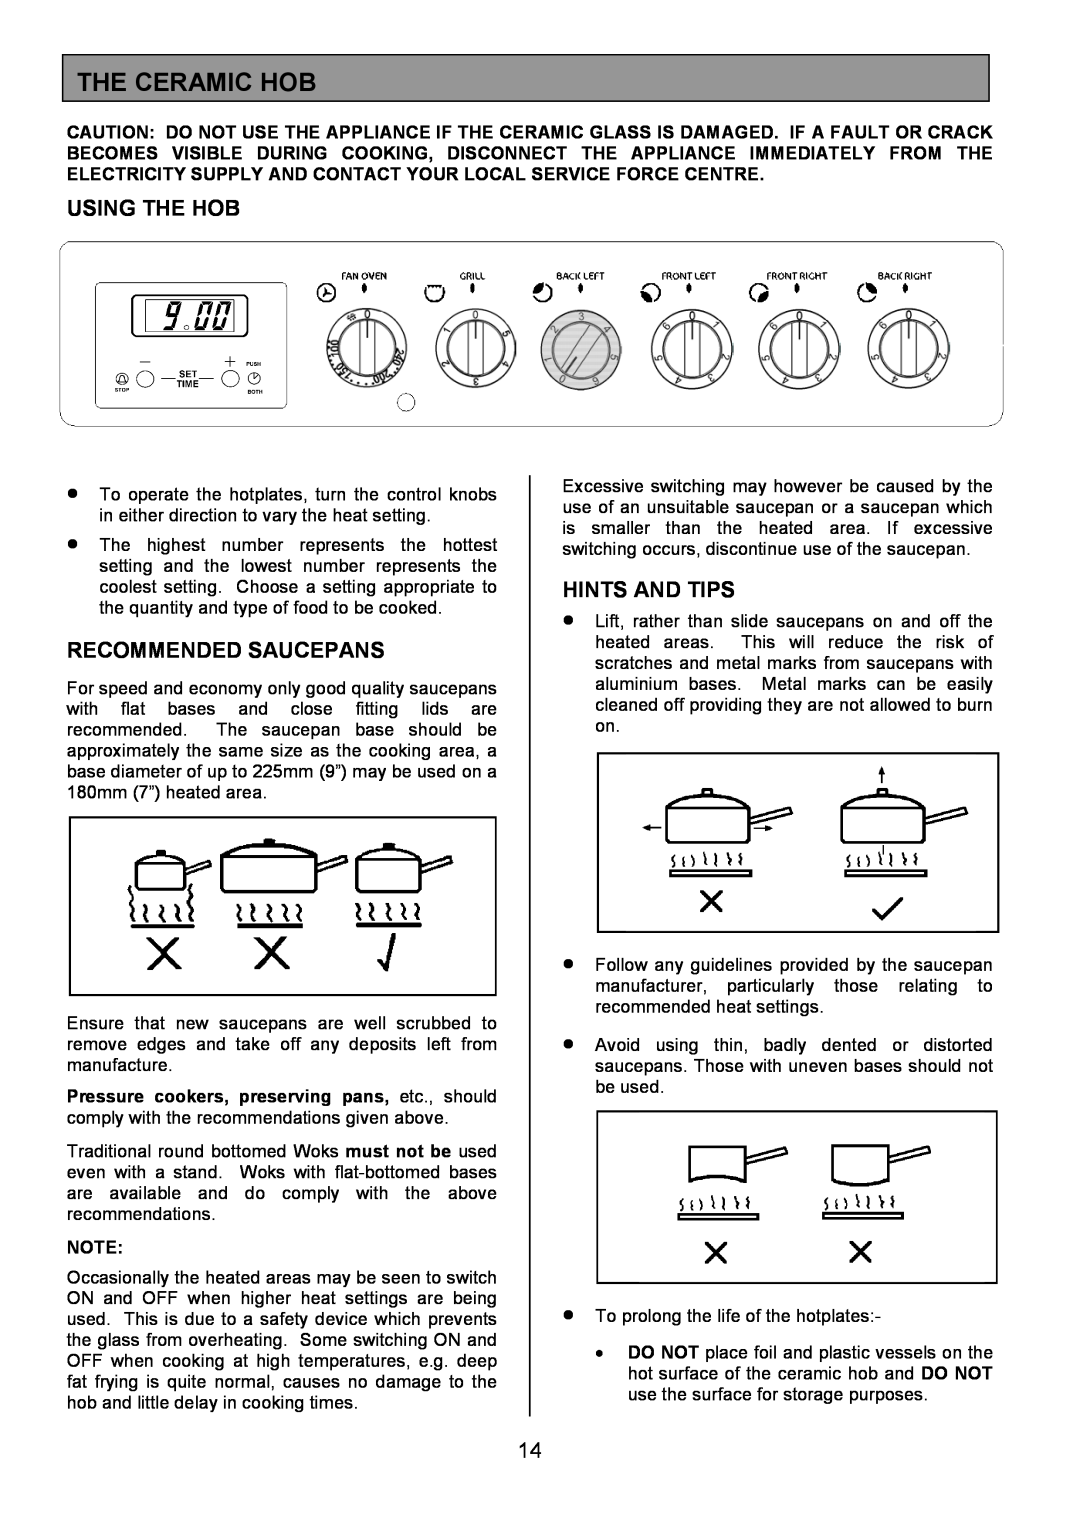 Tricity Bendix SE326 installation instructions The Ceramic Hob, Using The Hob, Recommended Saucepans, Hints And Tips 